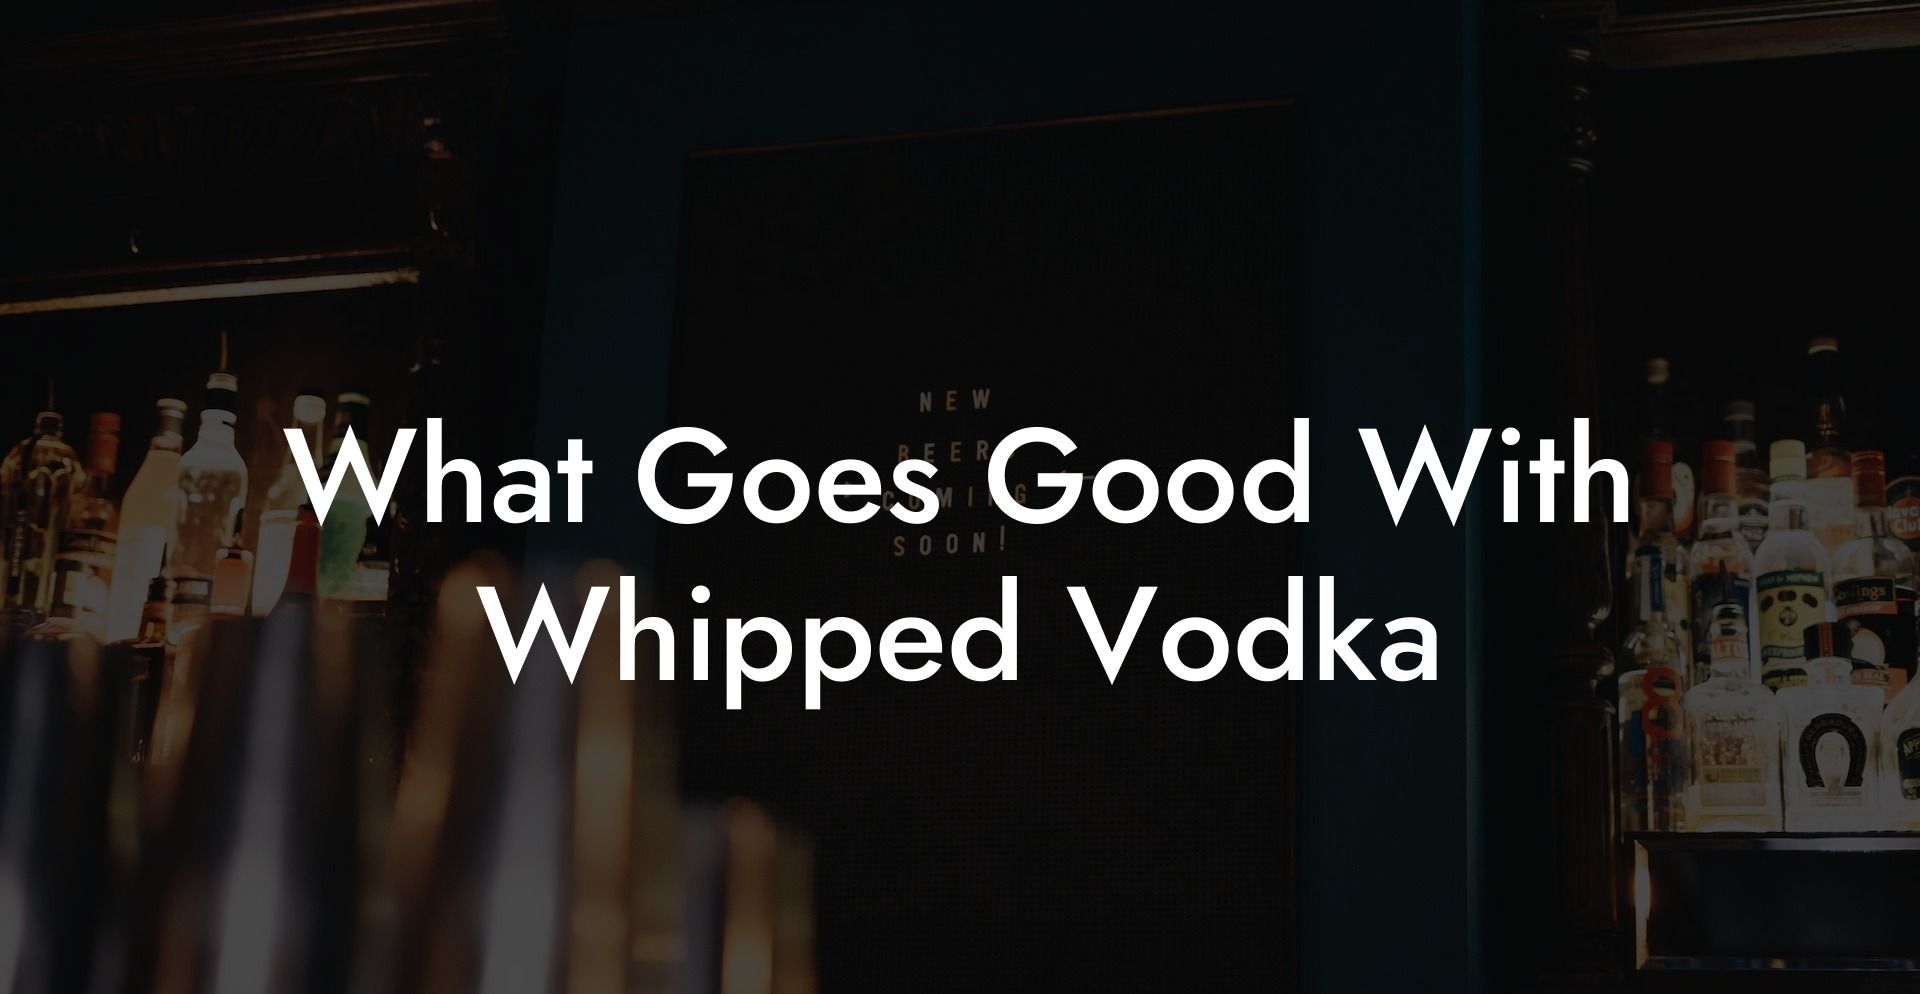 What Goes Good With Whipped Vodka